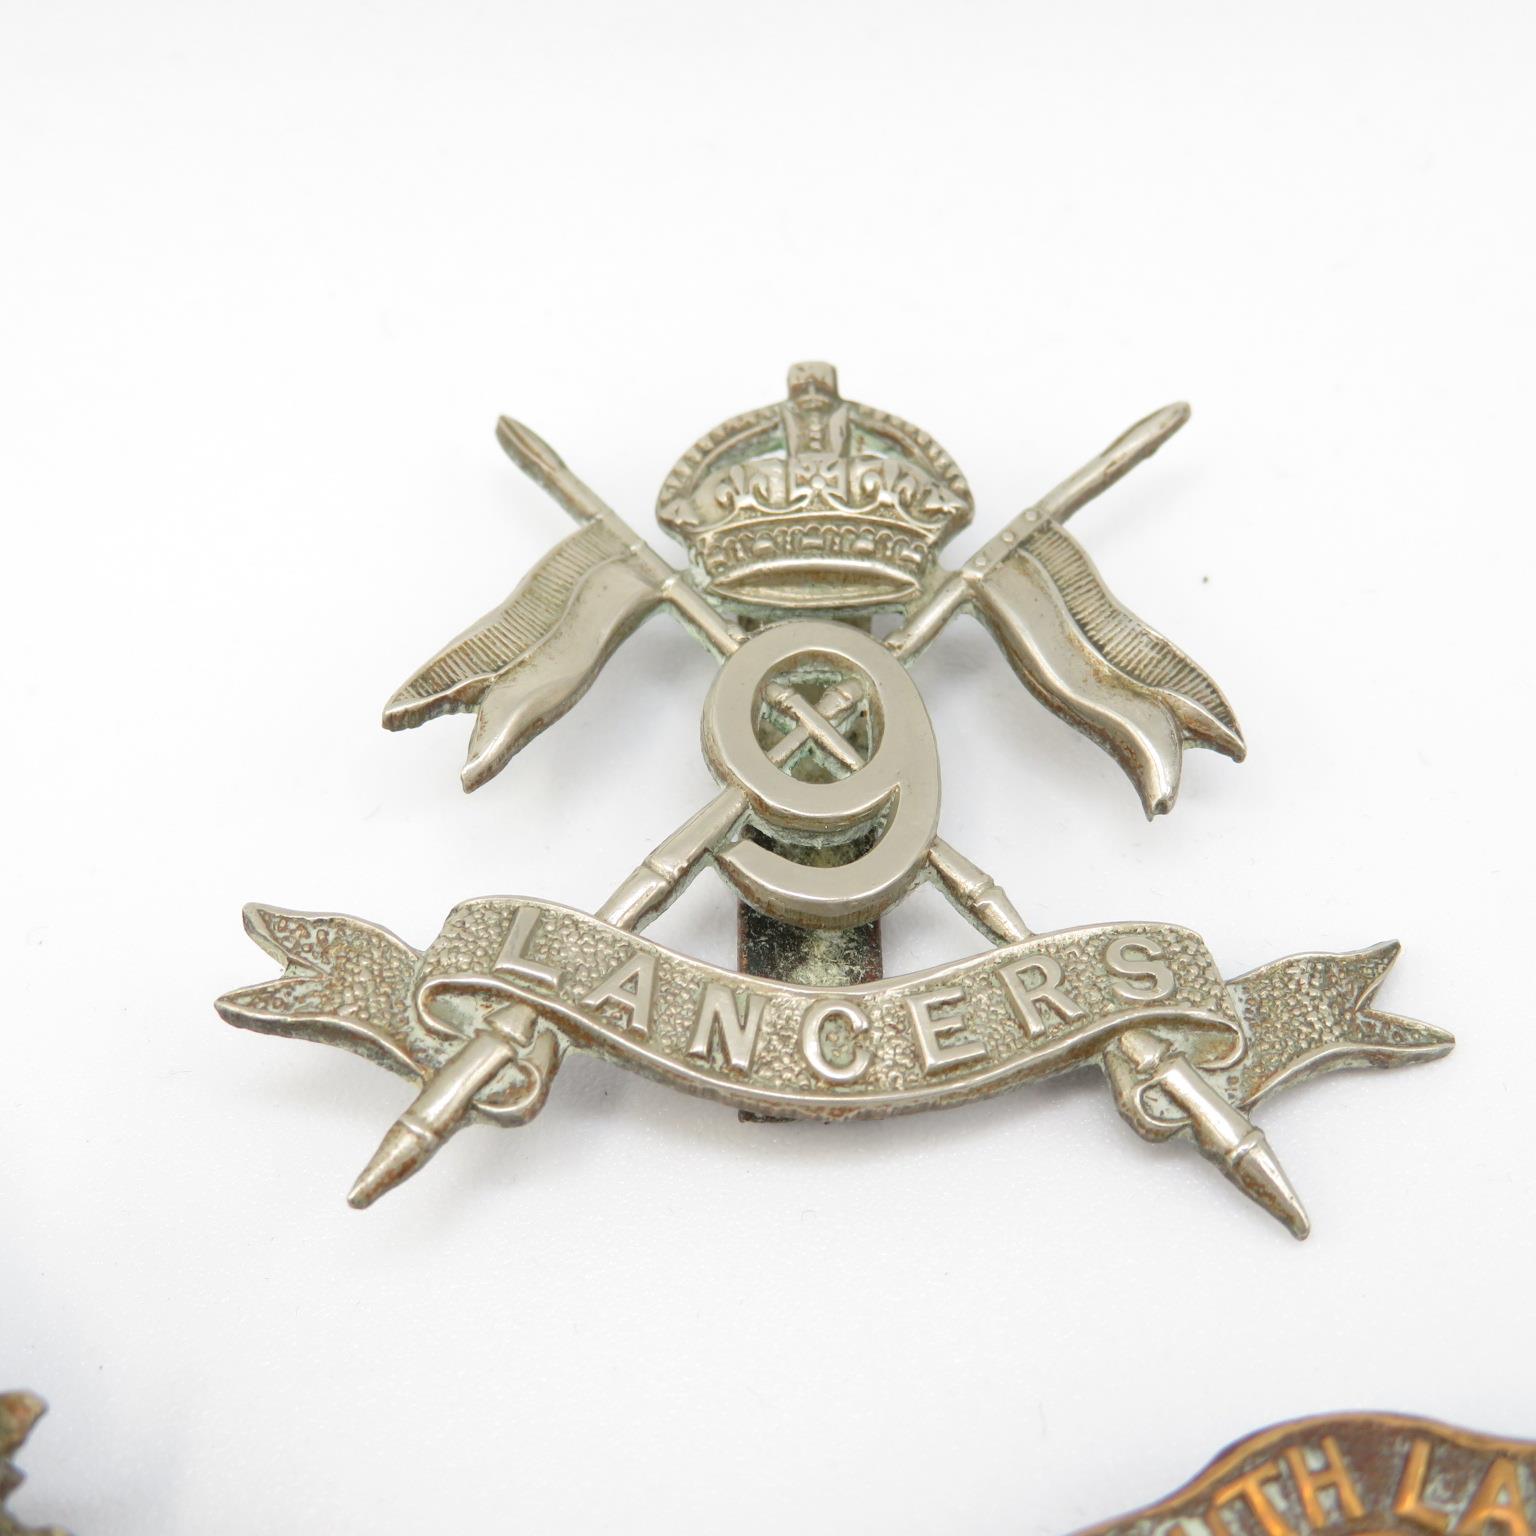 15x Military cap badges including Canadian and South Lancs etc. - - Image 3 of 15